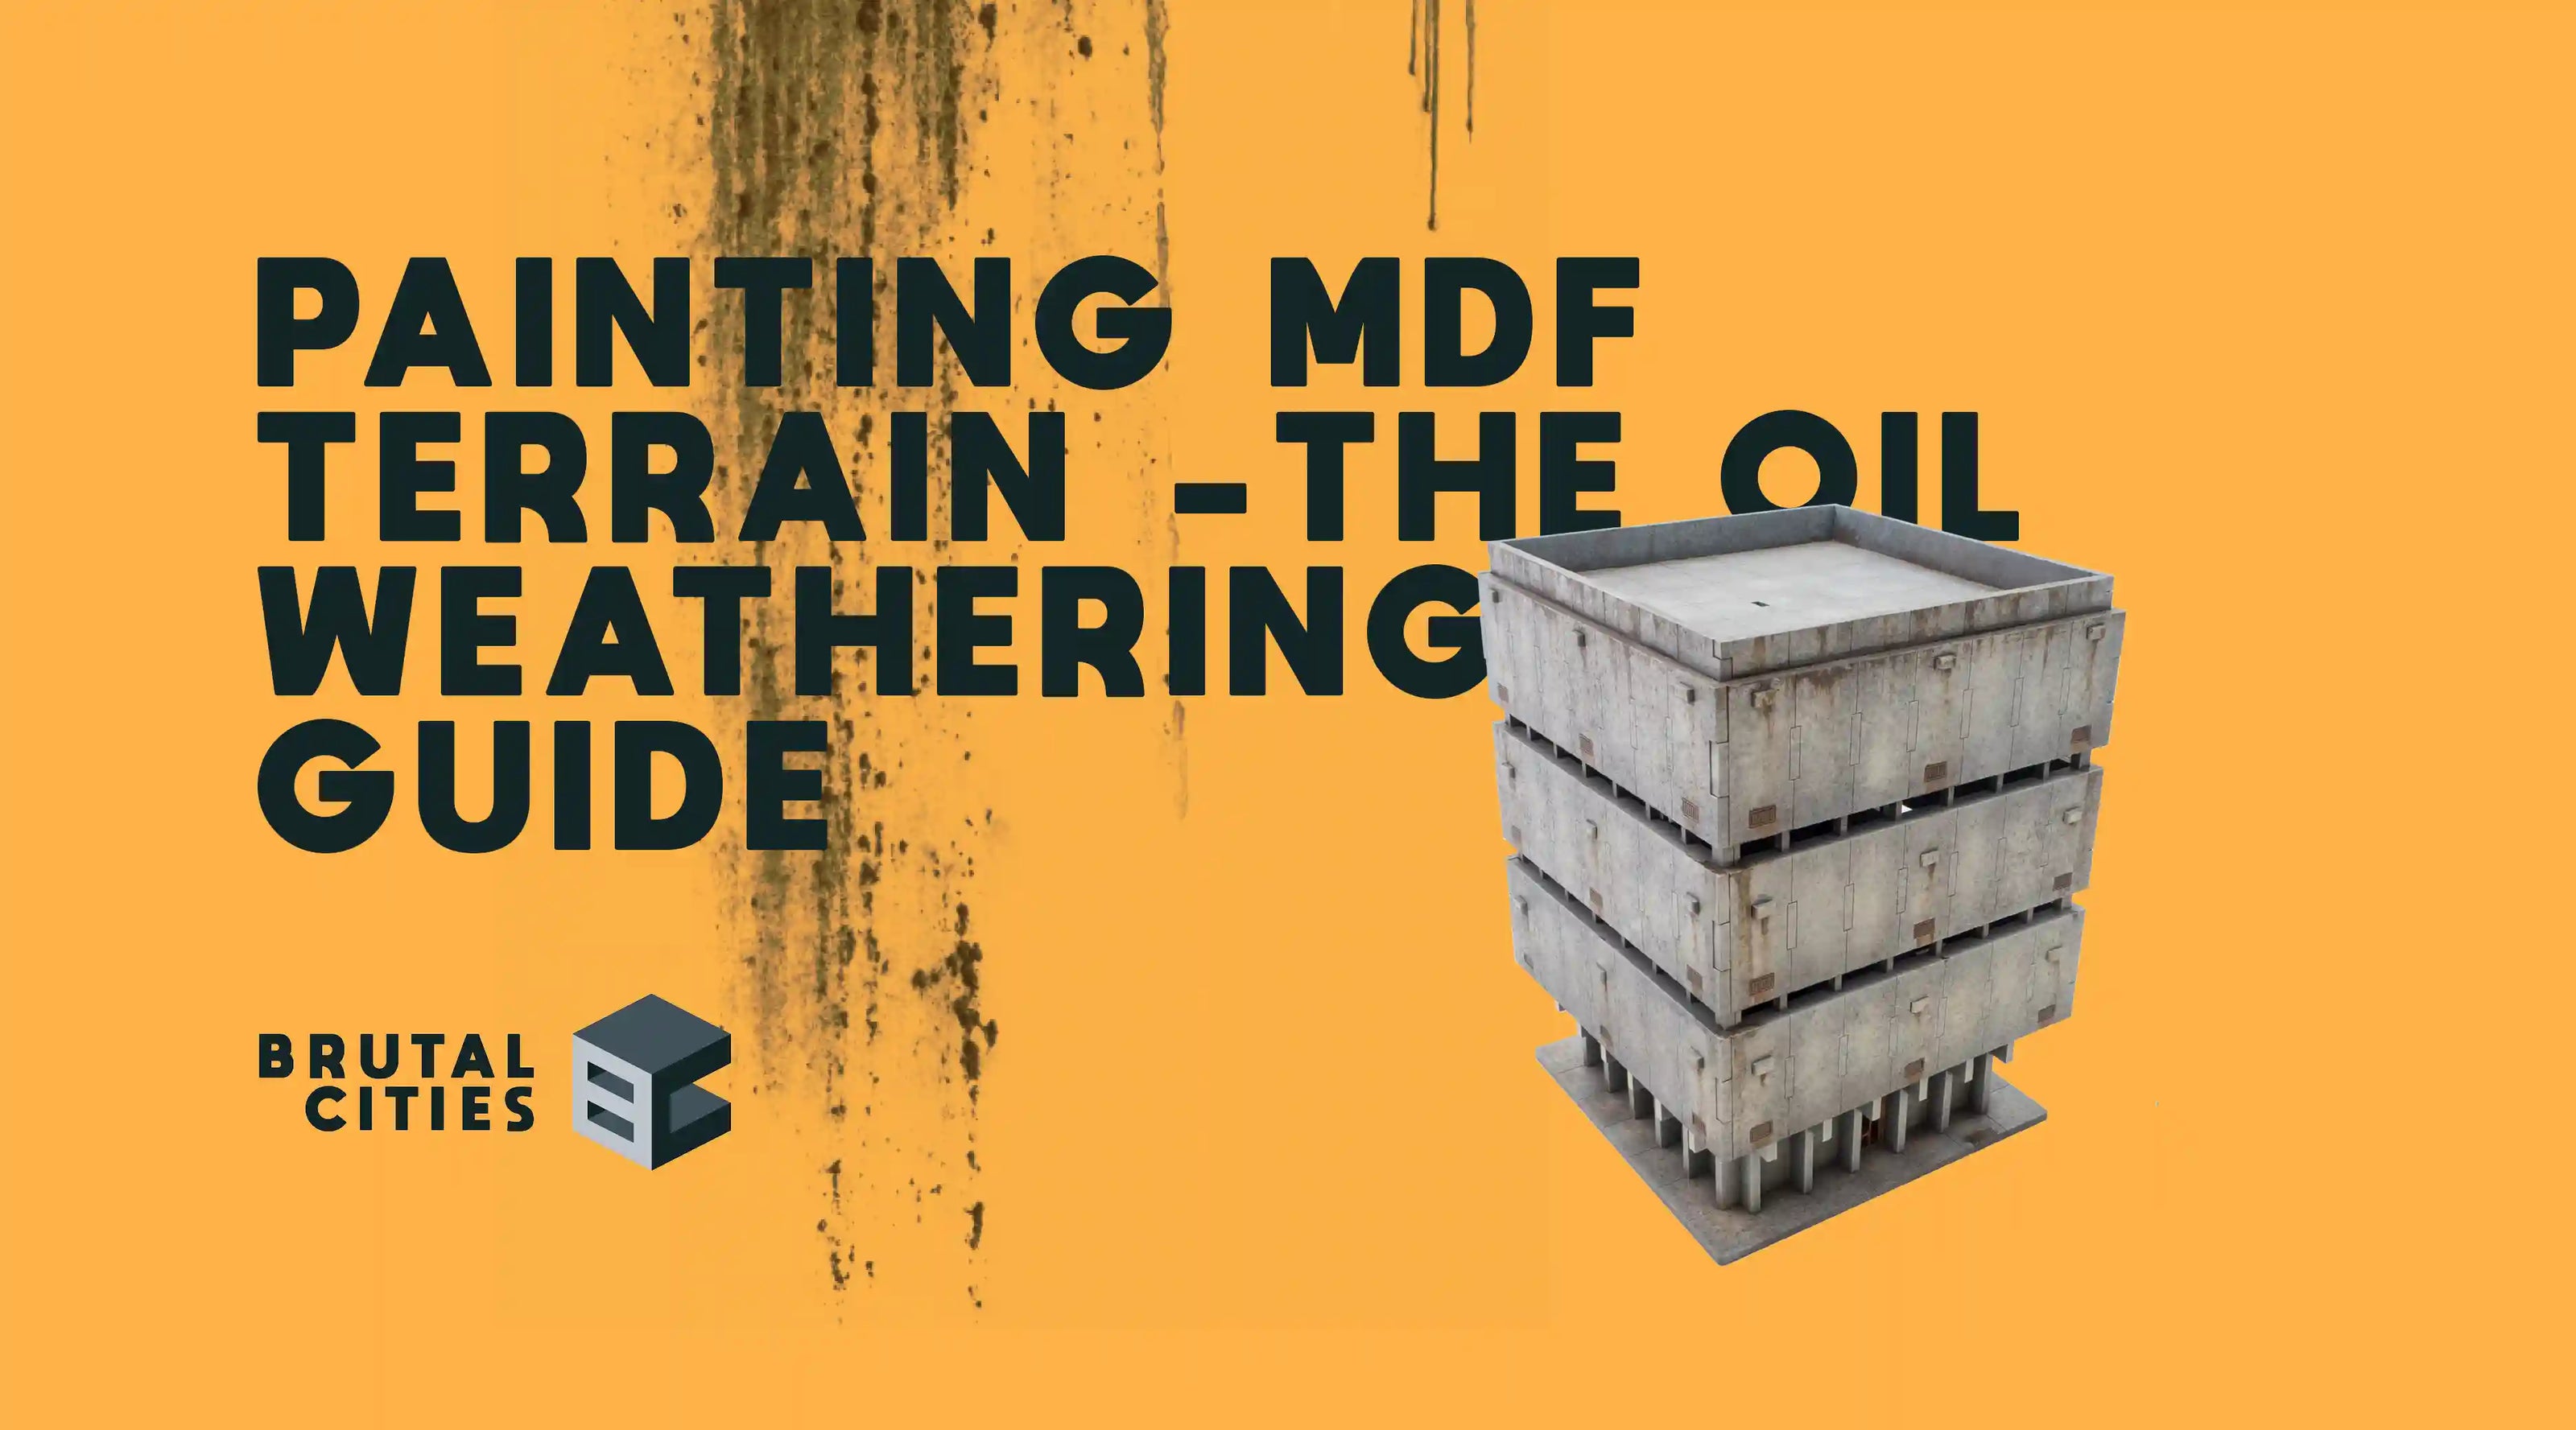 Orange banner reads - Painting MDF terrain - the oil weathering guide with a picture of a miniature MDF terrain model